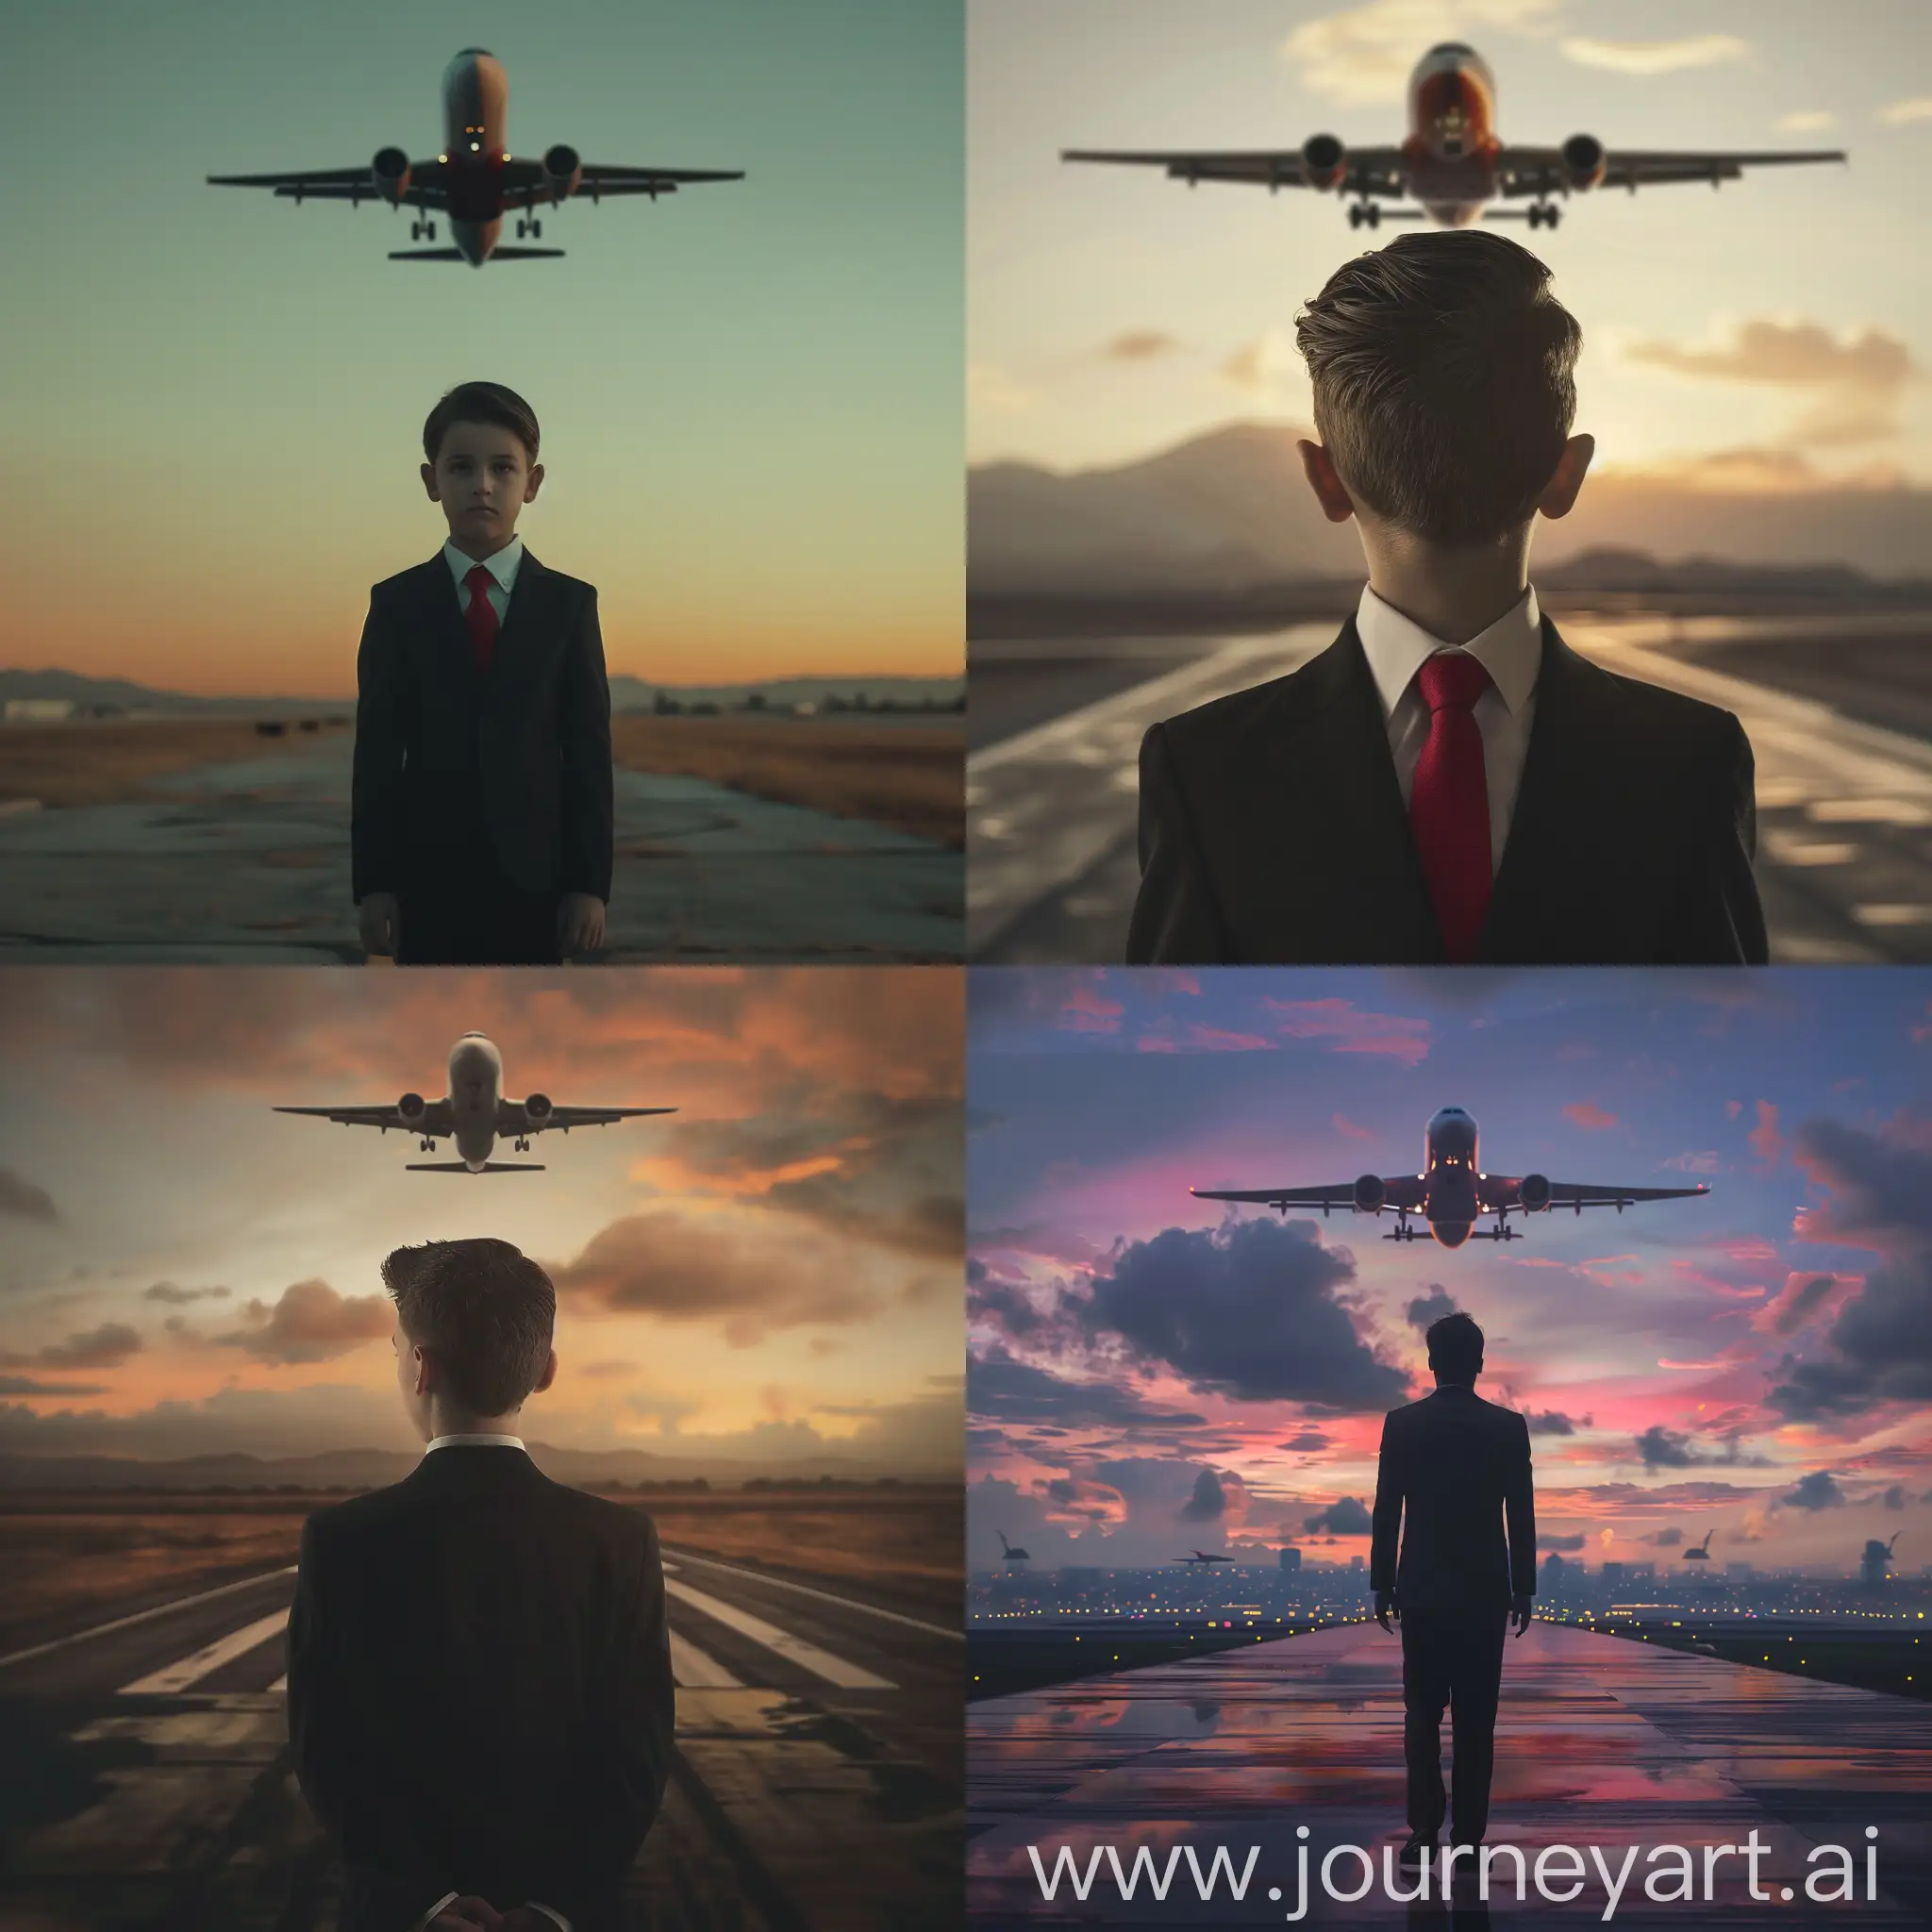 Caucasian-Boy-in-Black-Suit-and-Red-Tie-on-Runway-at-Dawn-with-Airplane-Taking-Off